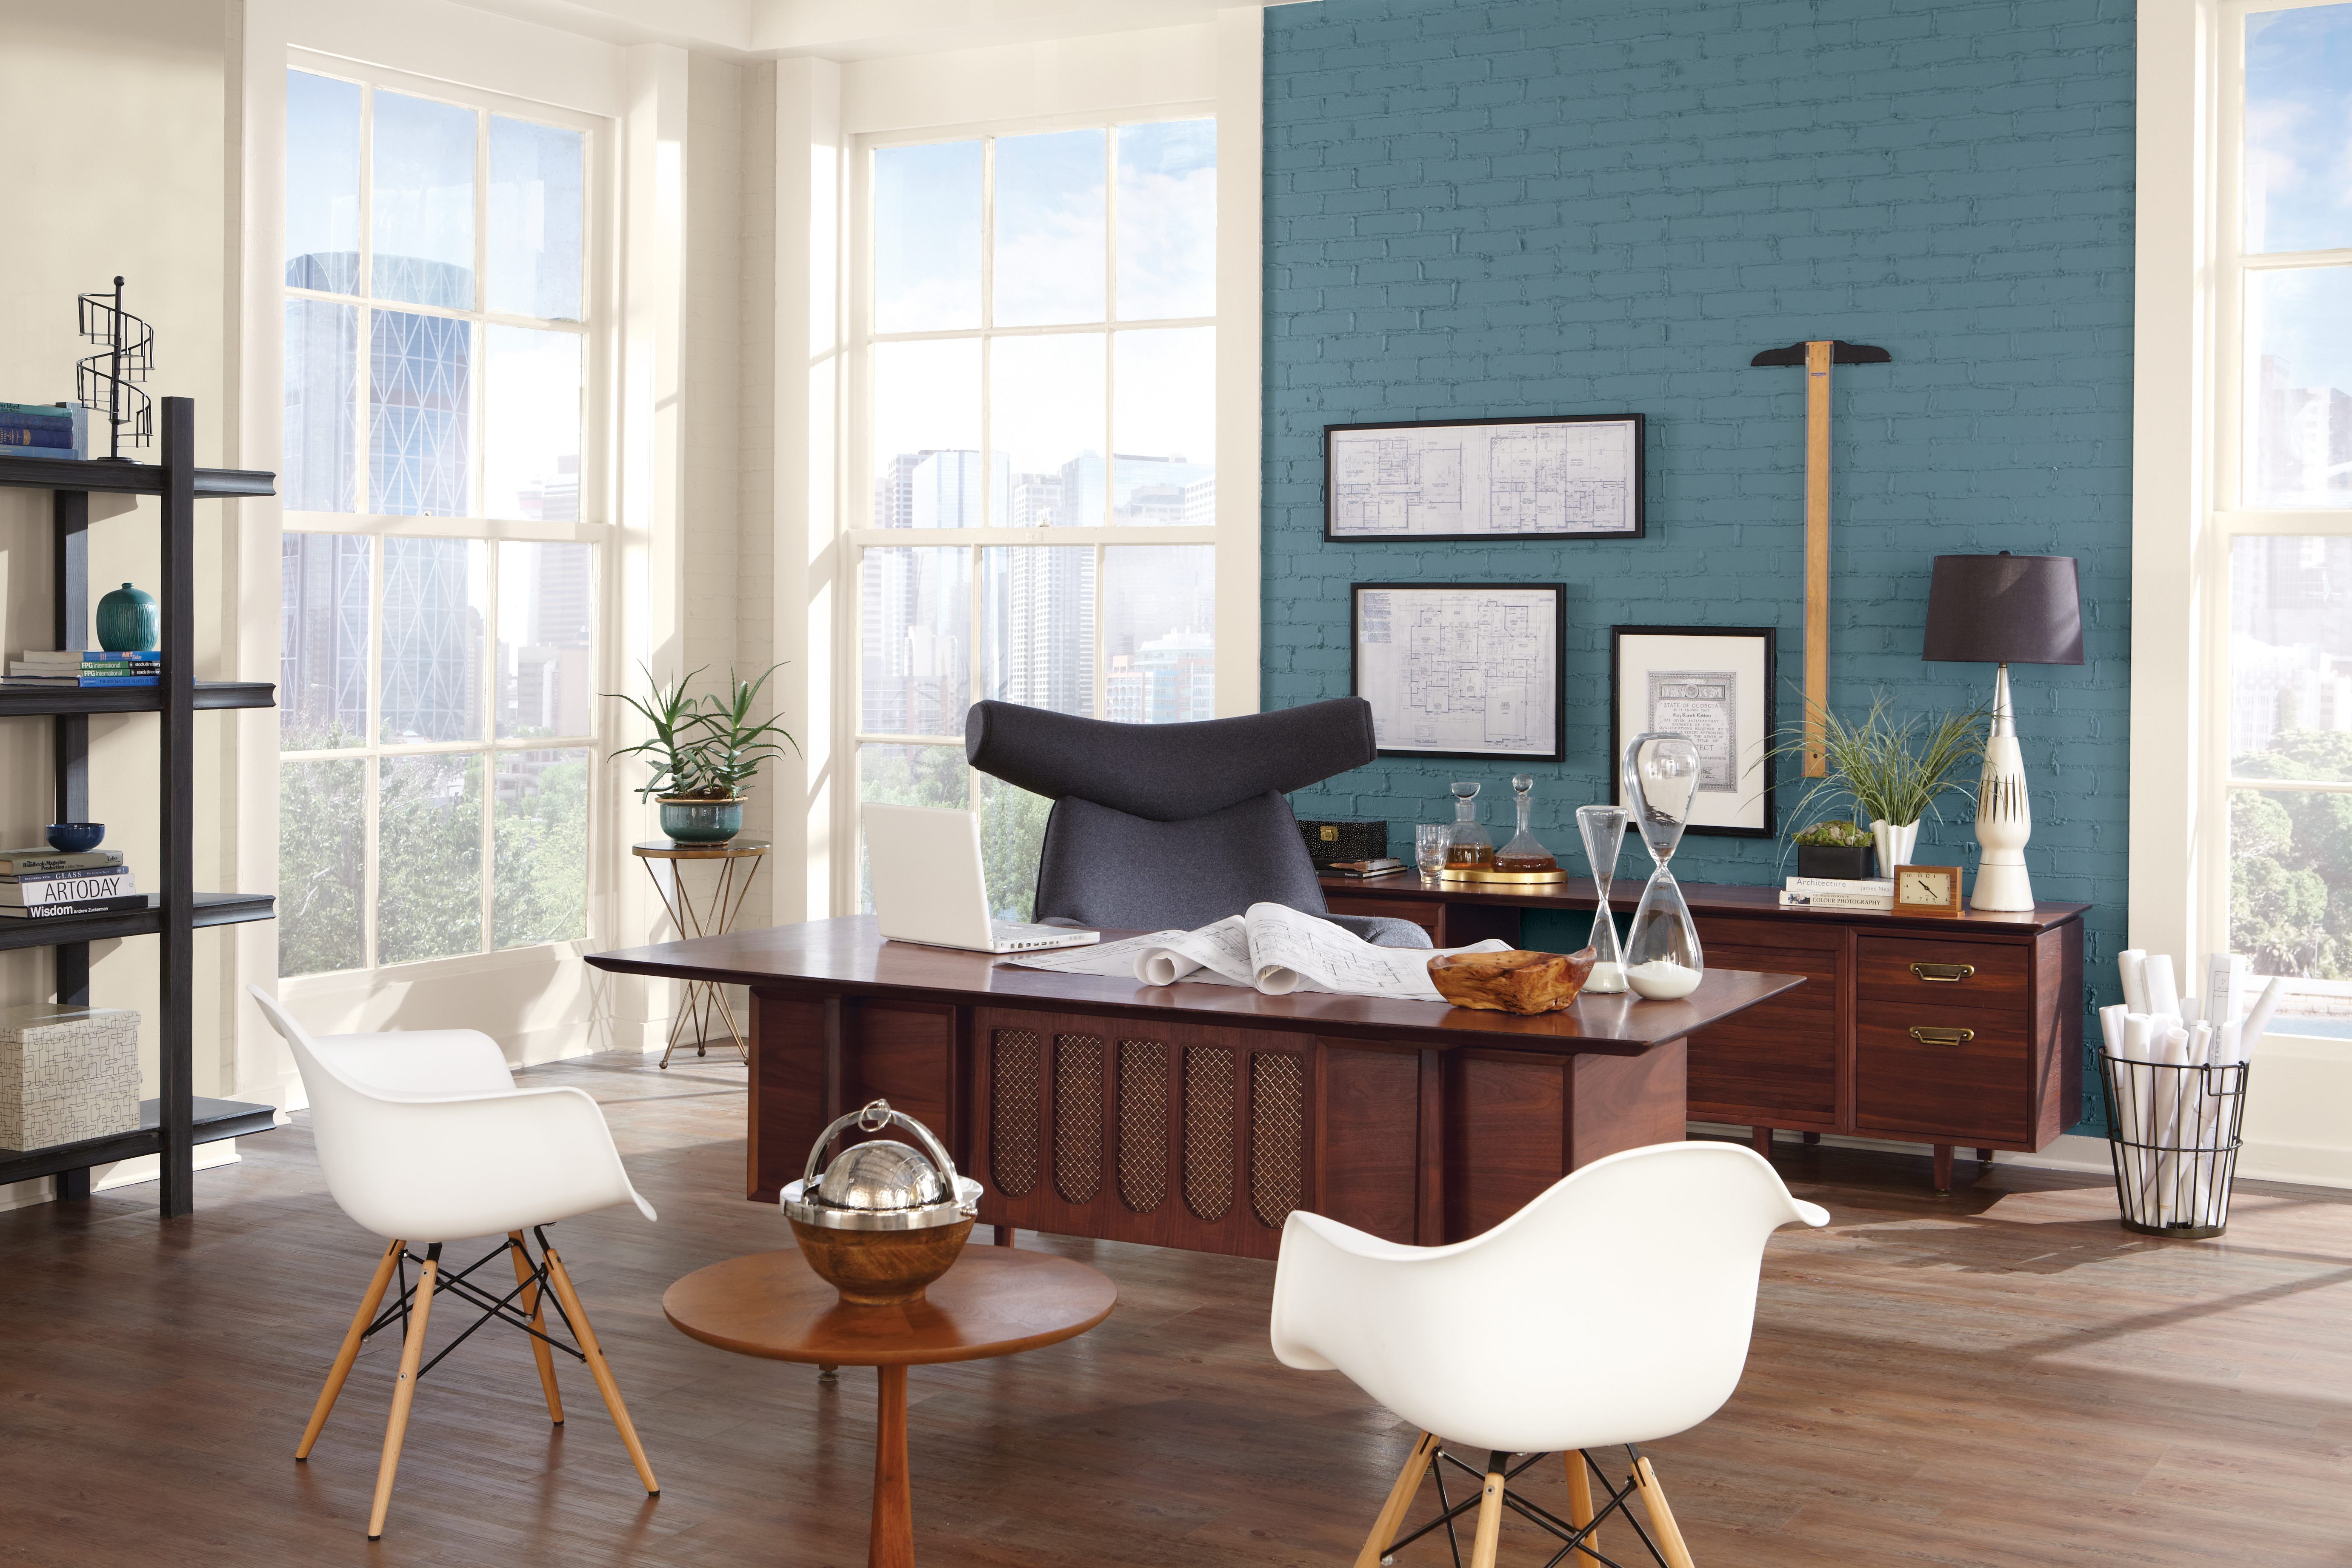 5 Ways To Optimize Your Workspace For Productivity - Office Design